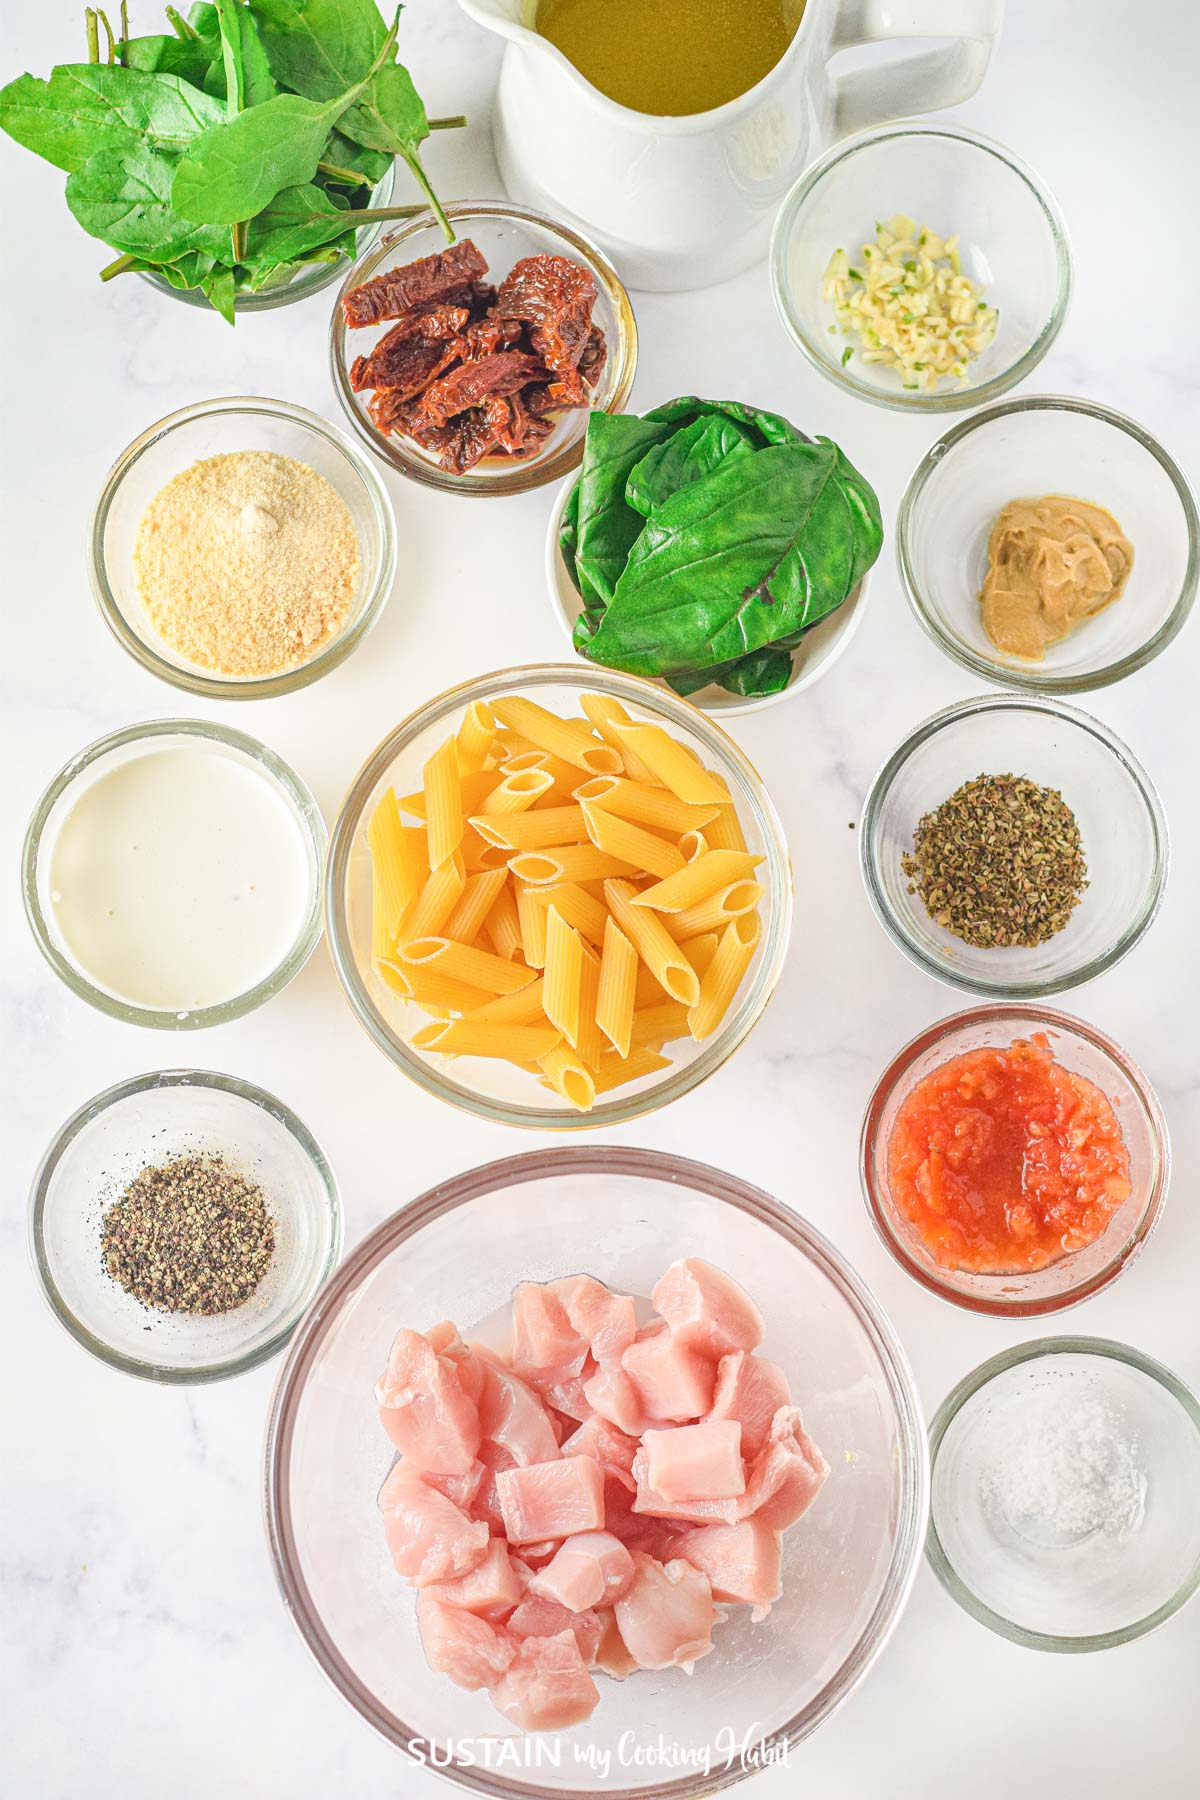 Ingredients in small bowls for Tuscan Pasta